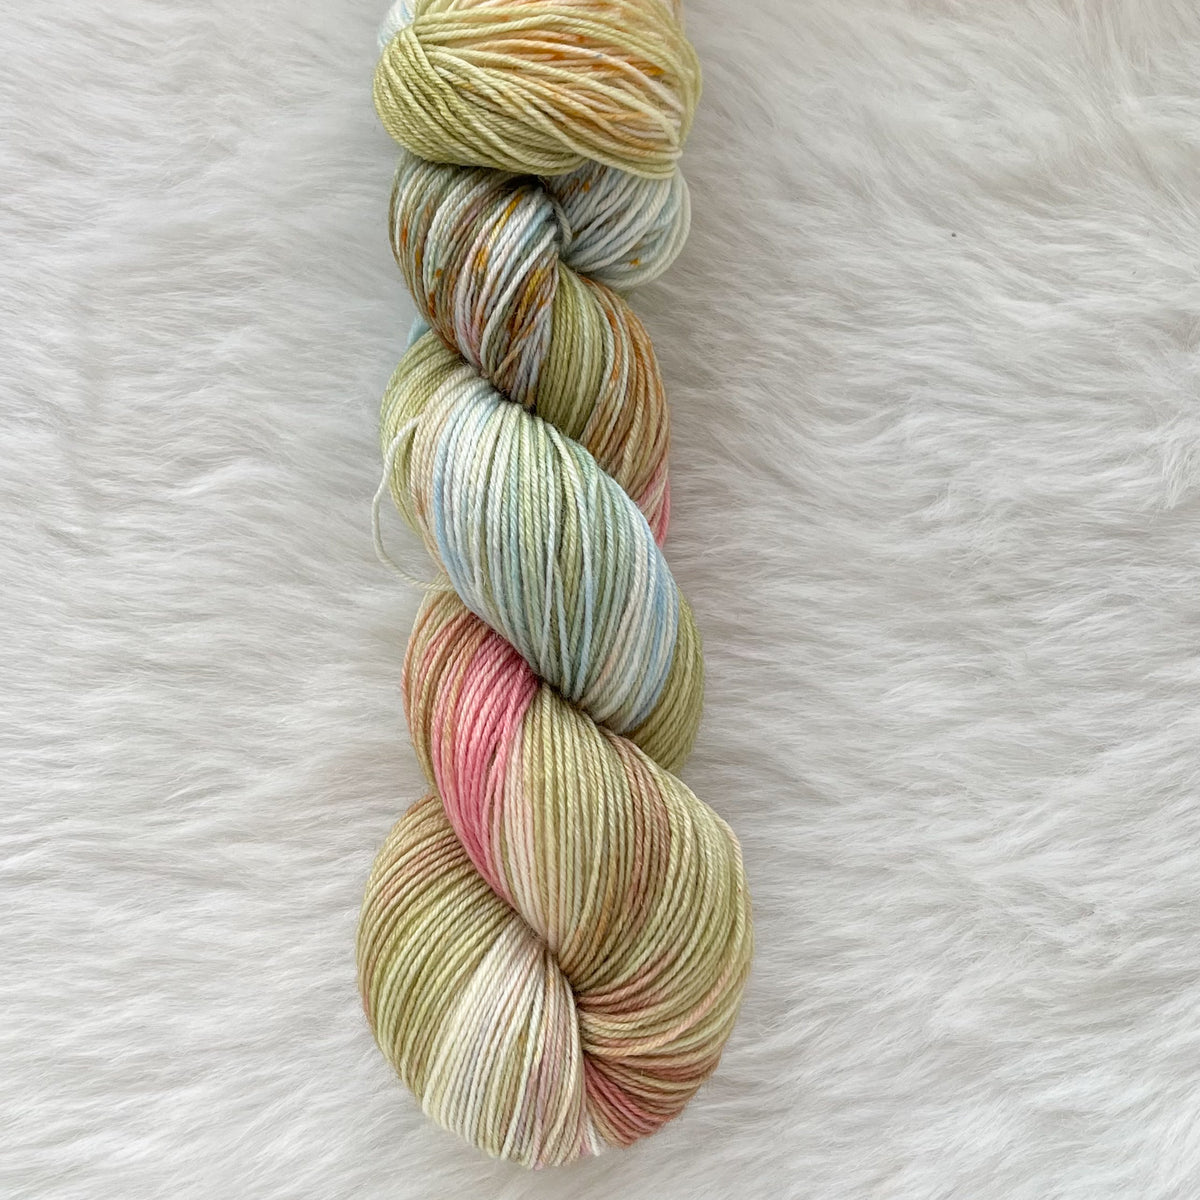 PETER RABBIT   -Ready to Ship - BFL Sock- Hand Dyed Yarn Skein